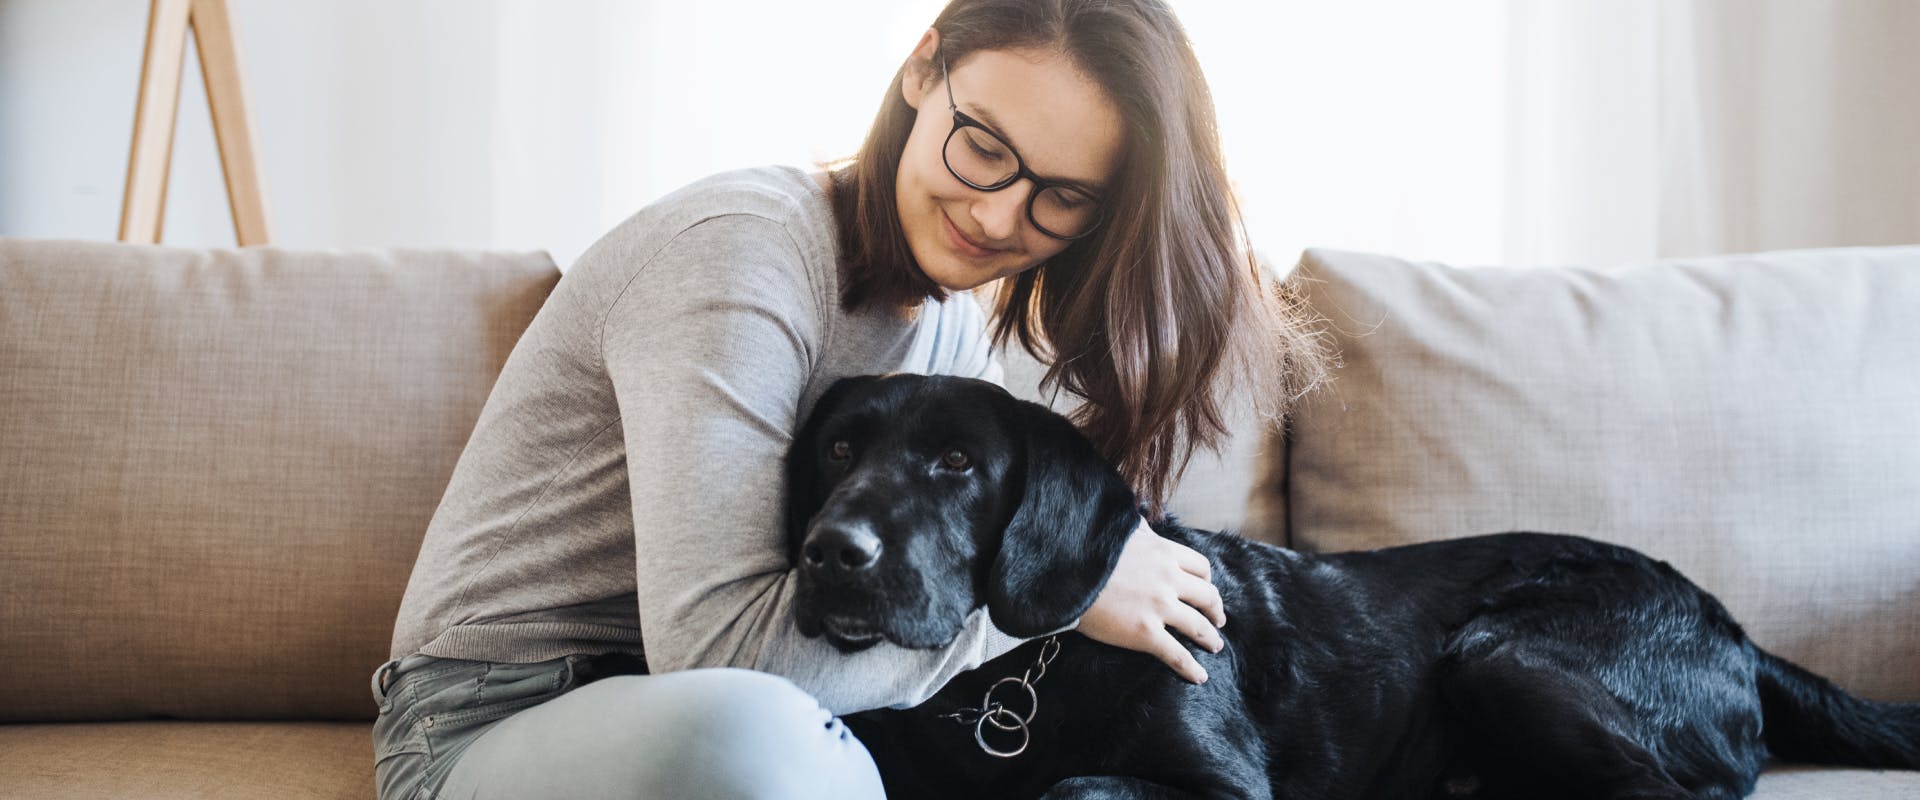 a smiling pet sitter wearing glasses sitting on a gray couch cuddling a black Labrador